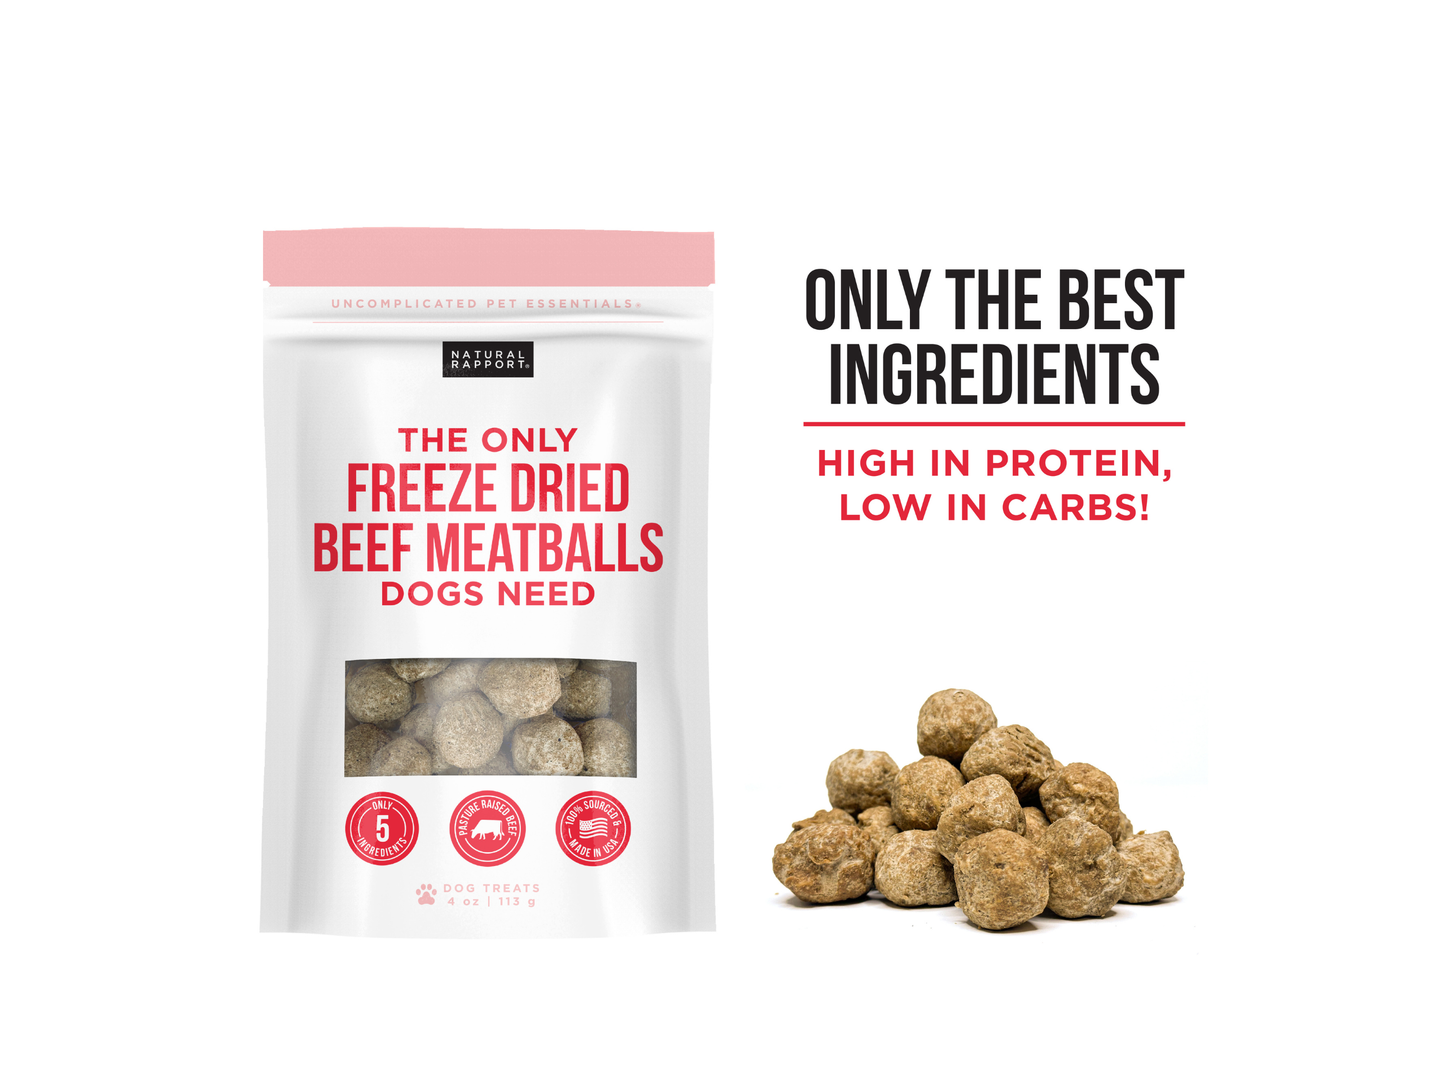 The Only Freeze Dried Beef Meatballs Dogs Need: 4 oz